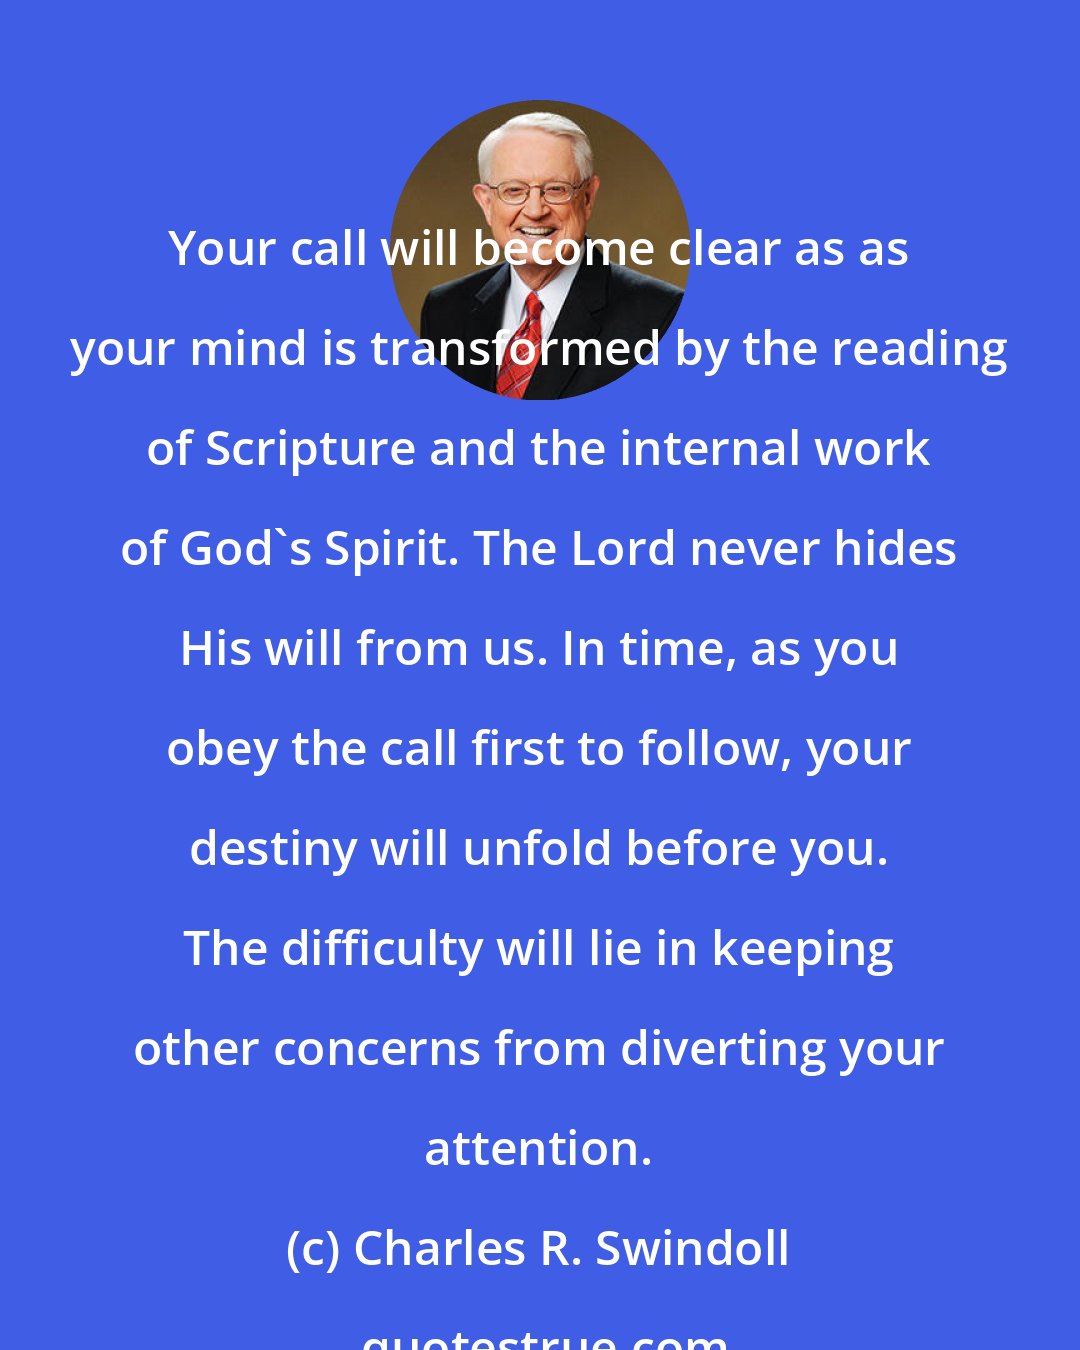 Charles R. Swindoll: Your call will become clear as as your mind is transformed by the reading of Scripture and the internal work of God's Spirit. The Lord never hides His will from us. In time, as you obey the call first to follow, your destiny will unfold before you. The difficulty will lie in keeping other concerns from diverting your attention.